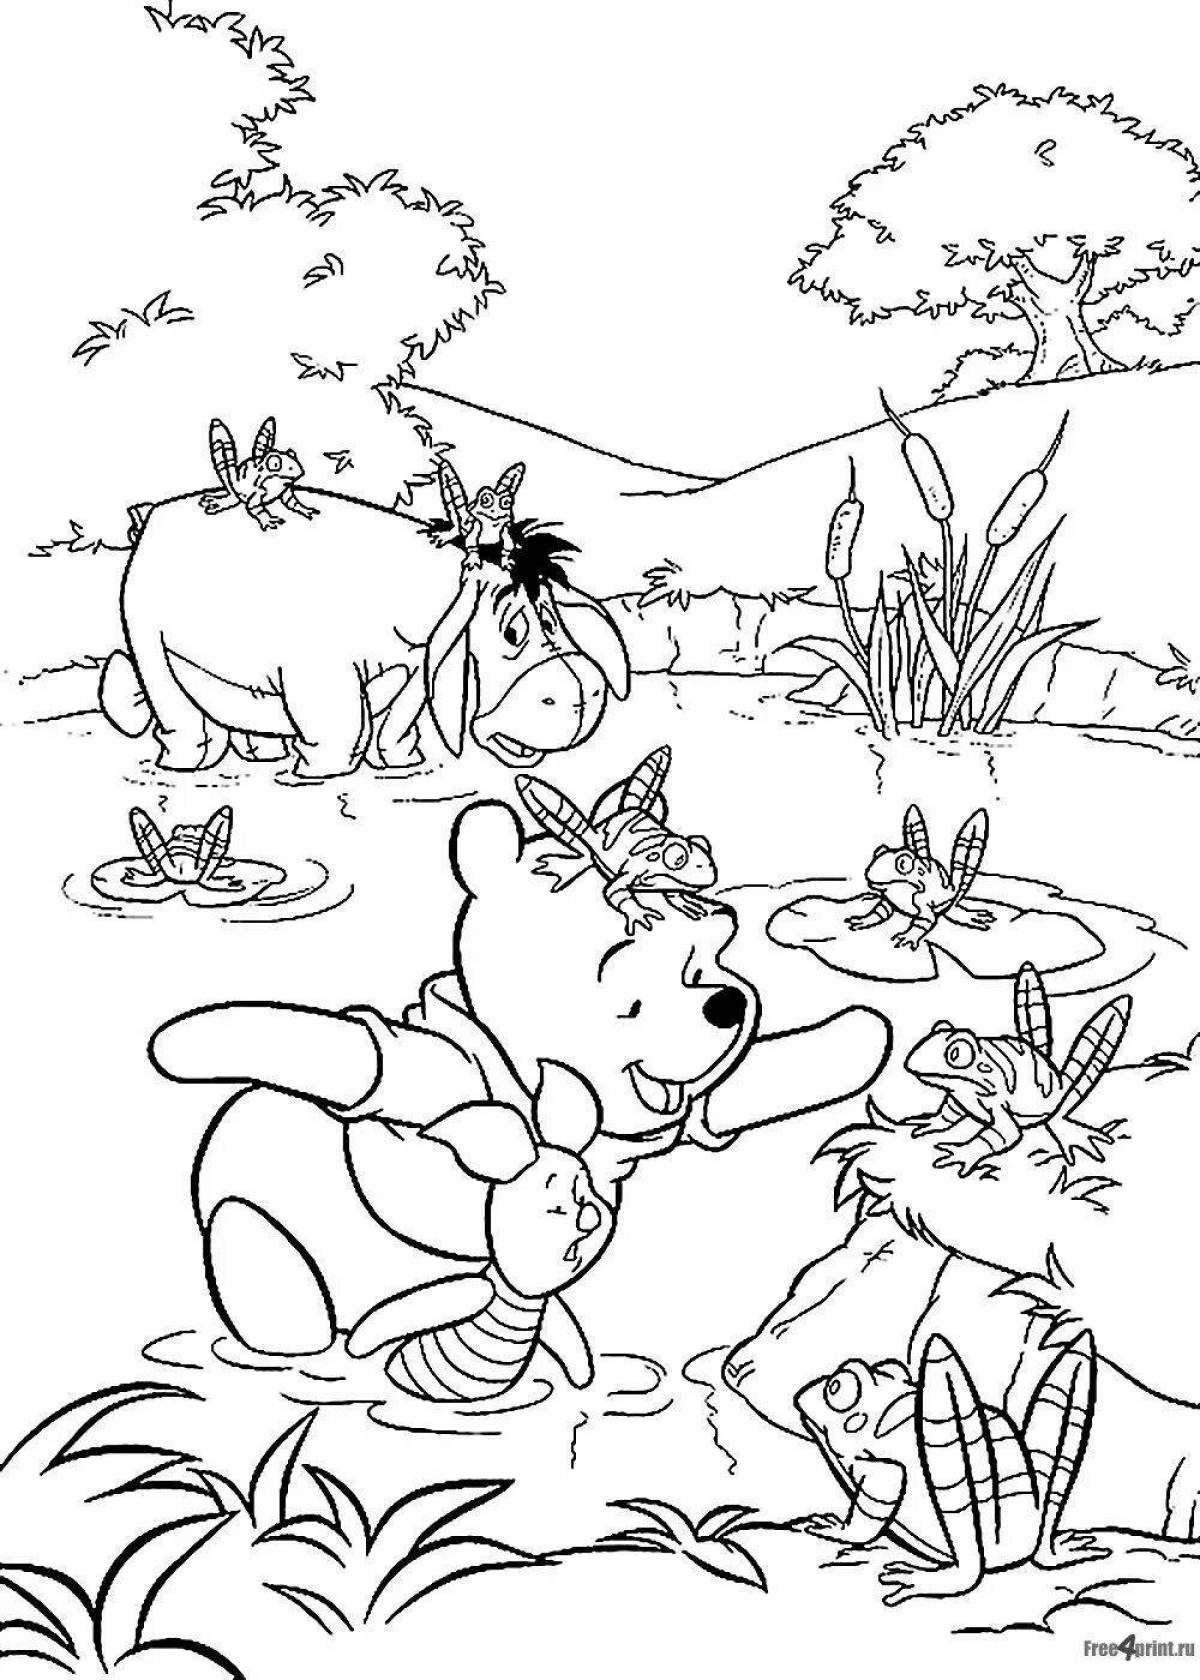 Peppy winnie and his friends